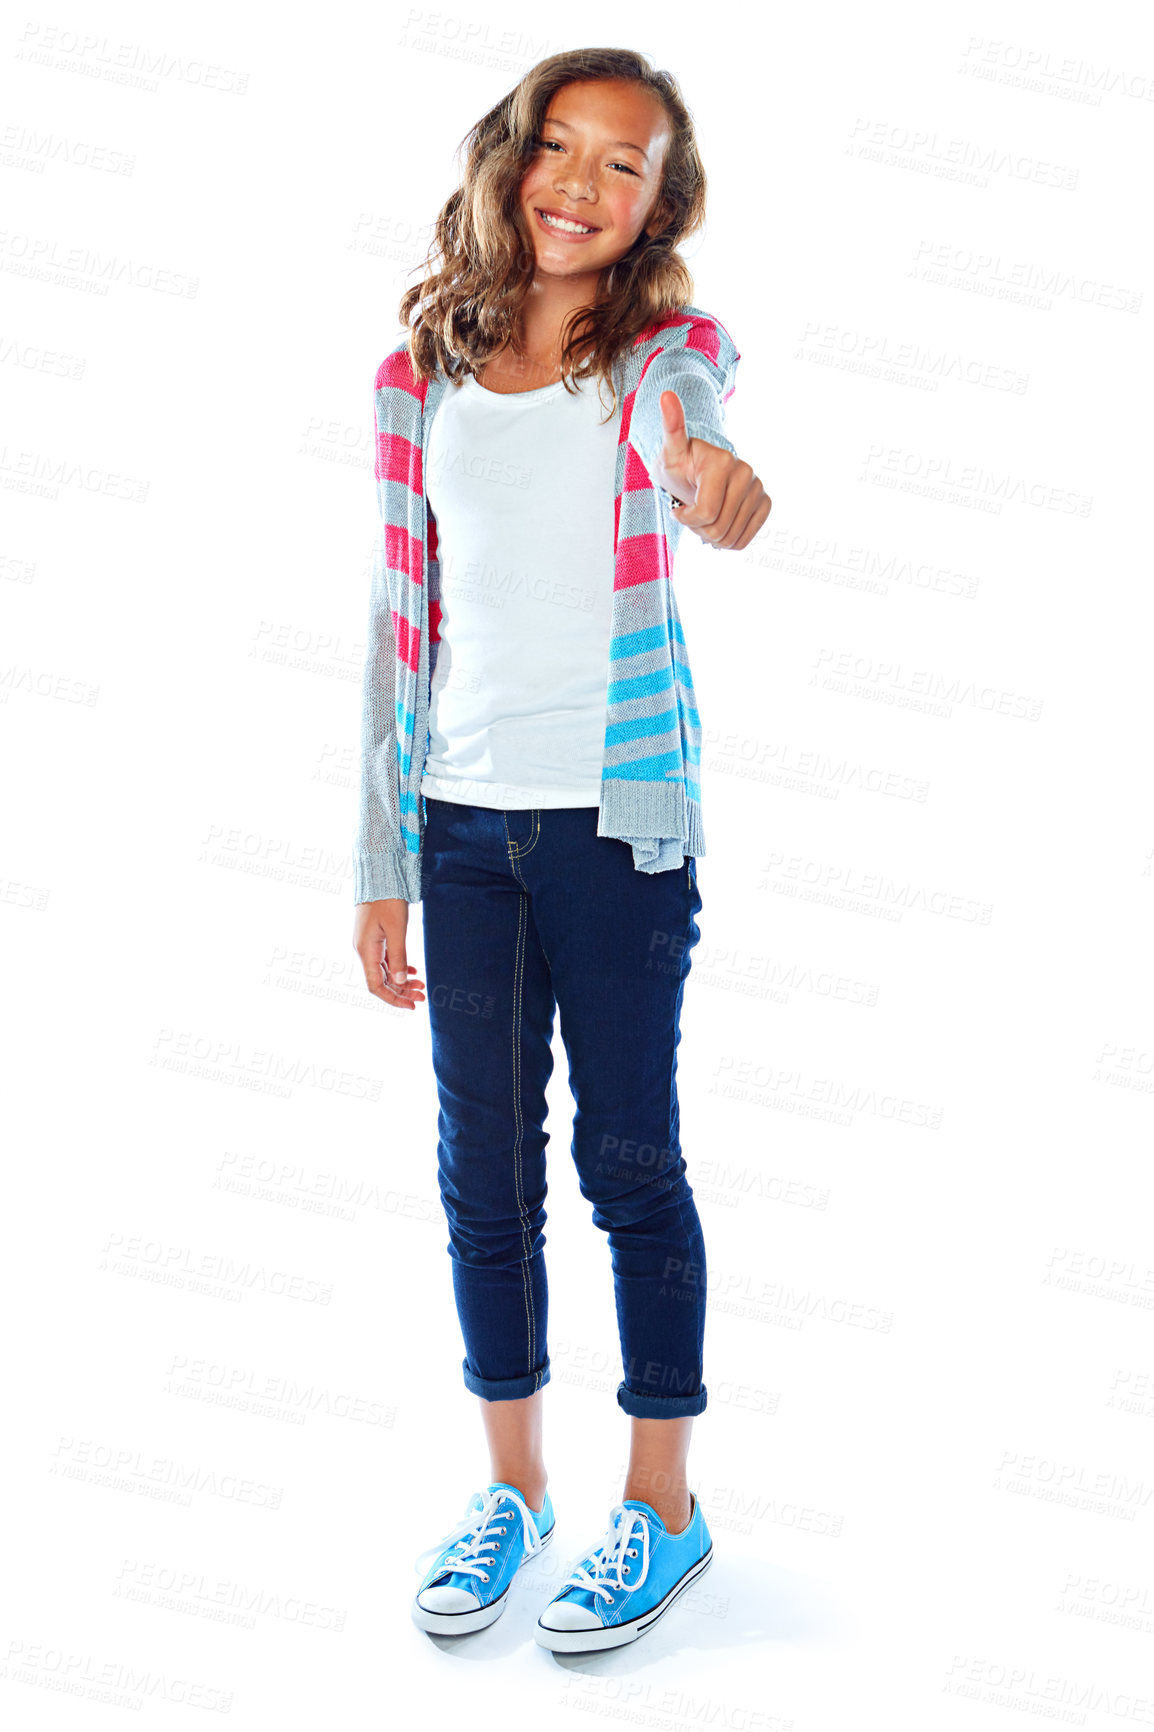 Buy stock photo Studio shot of a young girl giving a thumbs up against a white background